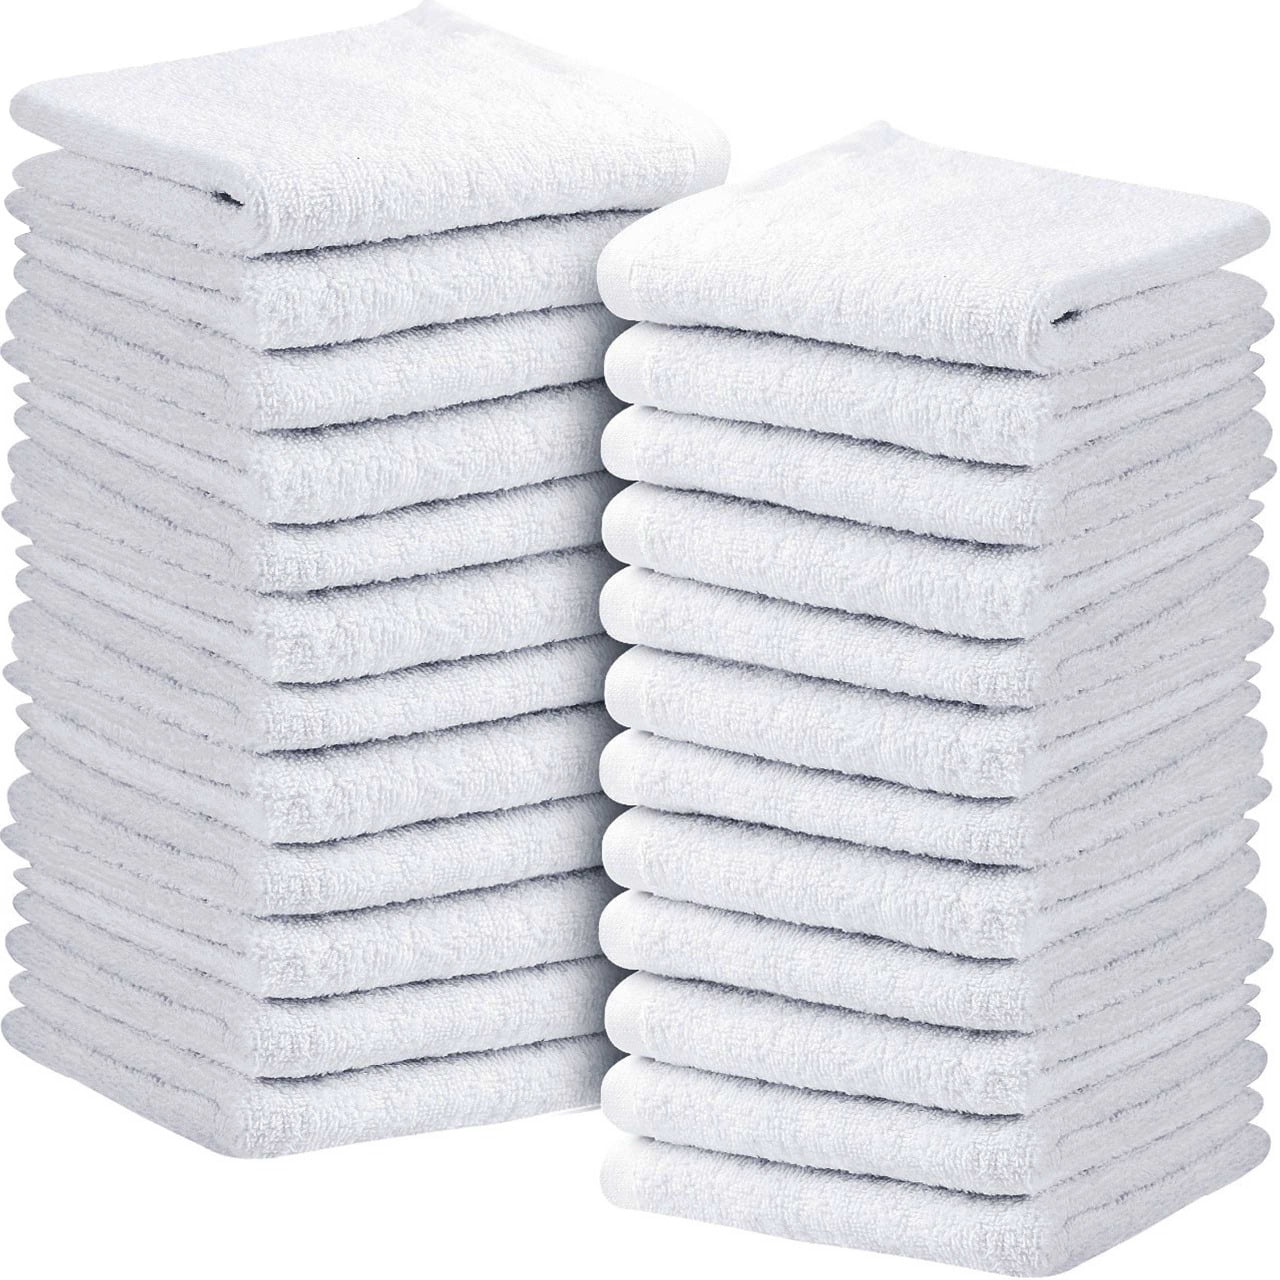 60 Pieces New Wash Cloth Face Towel Gym Cleaning Towels 12x12 100% Cotton 